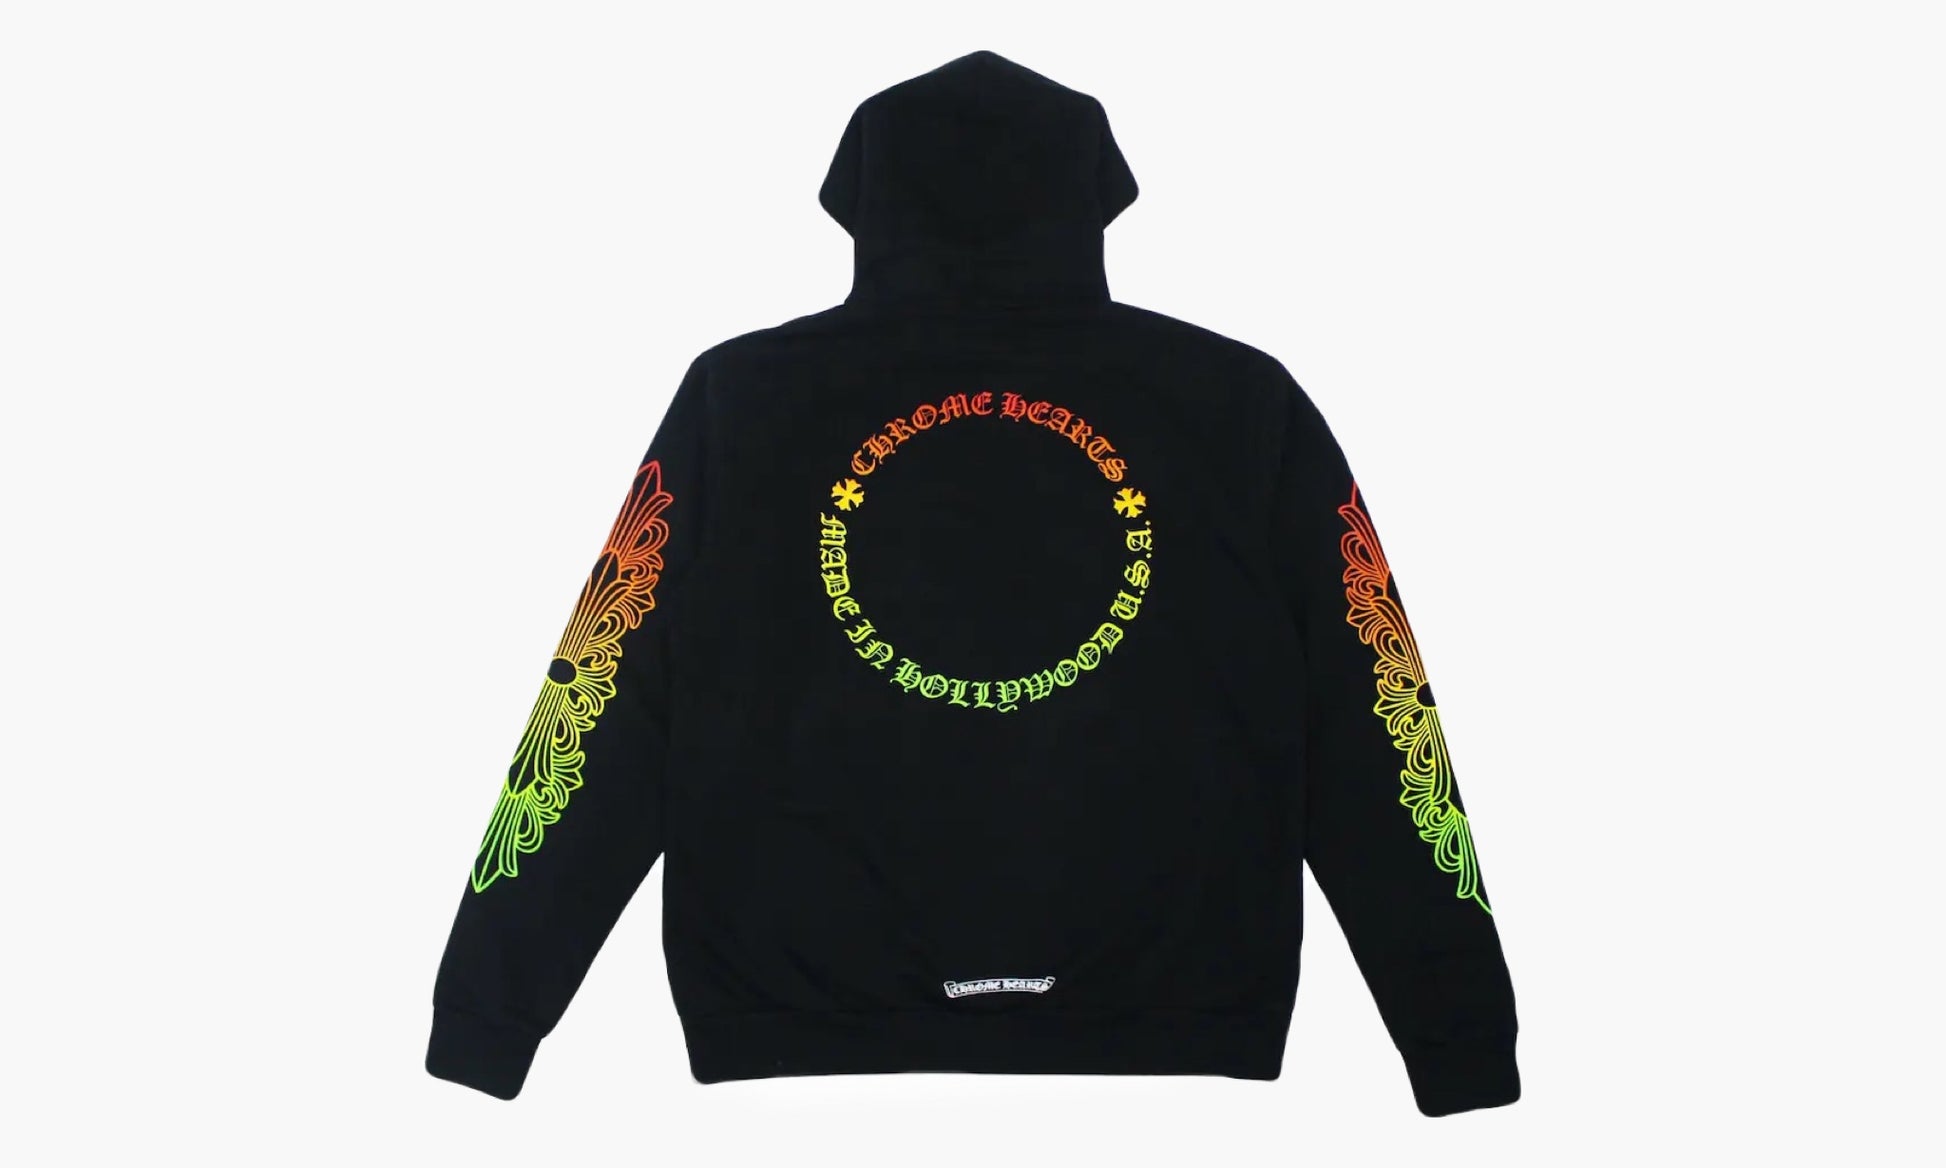 Chrome Hearts Floral Sleeve Gradient Made In Hollywood Hoodie Black Gradient | The Sortage